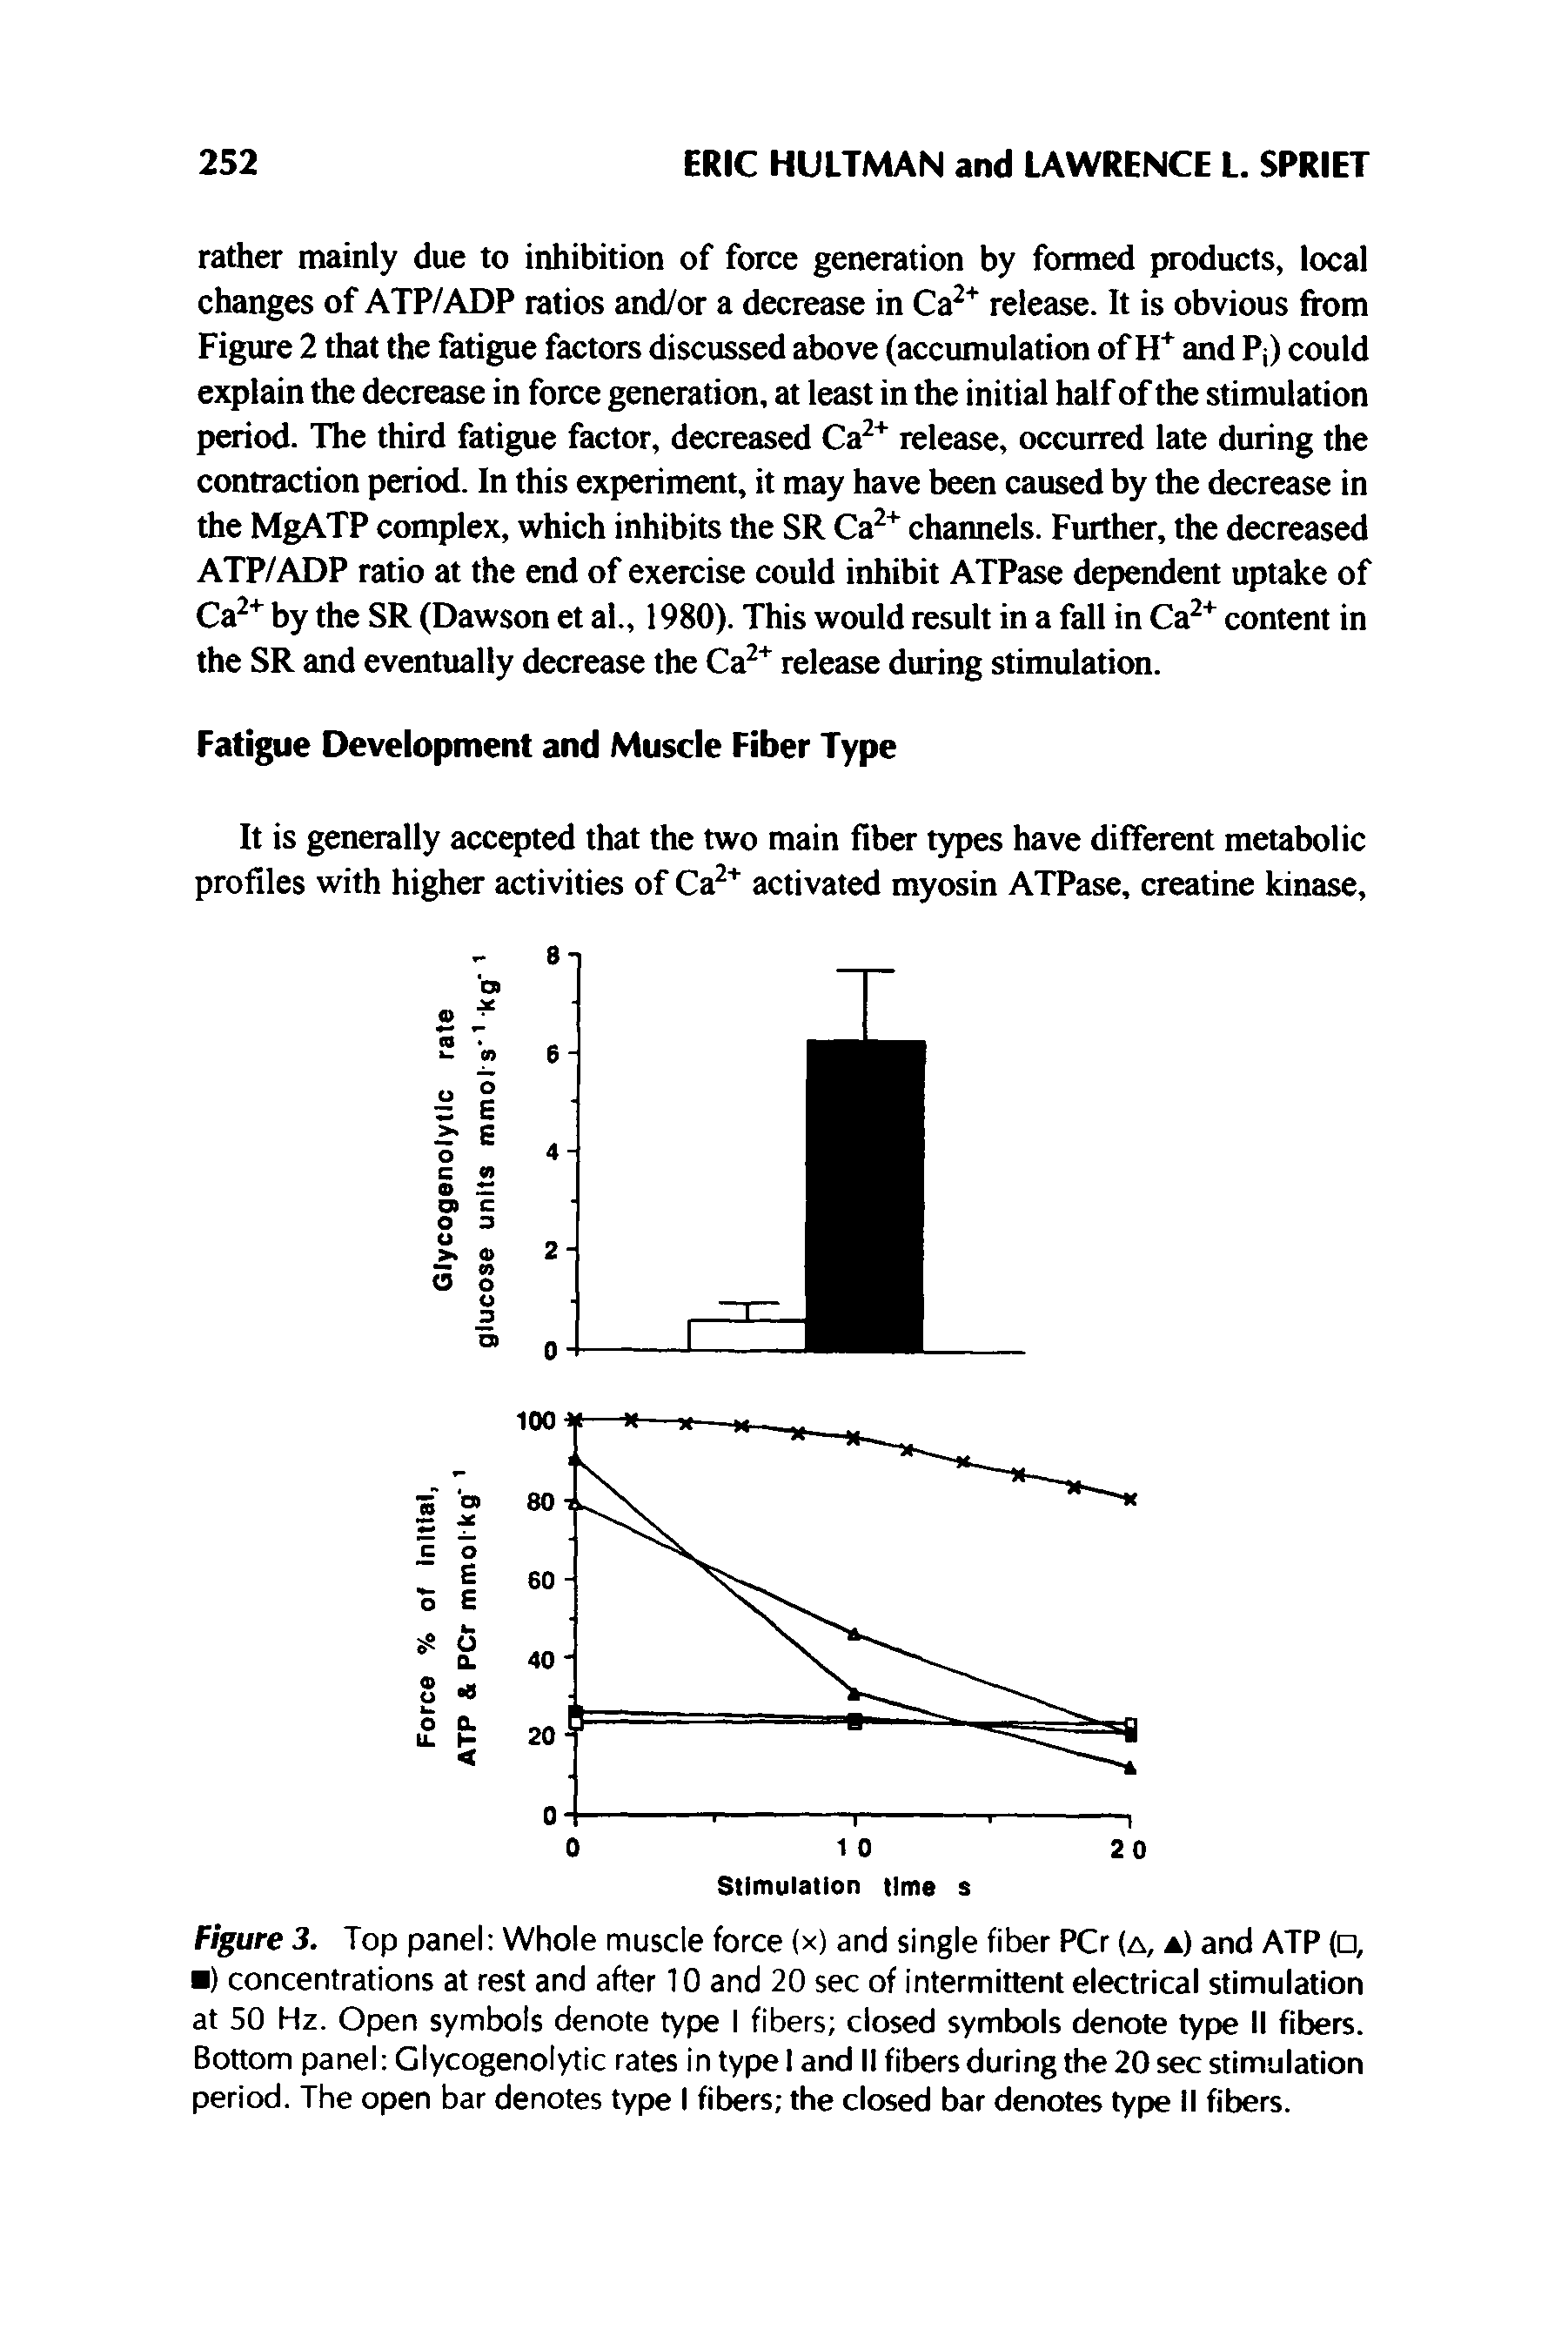 Figure 3. Top panel Whole muscle force (x) and single fiber PCr (a, a) and ATP ( , ) concentrations at rest and after 10 and 20 sec of intermittent electrical stimulation at 50 Hz. Open symbols denote type I fibers closed symbols denote type II fibers. Bottom panel Glycogenolytic rates in type I and II fibers during the 20 sec stimulation period. The open bar denotes type I fibers the closed bar denotes type II fibers.